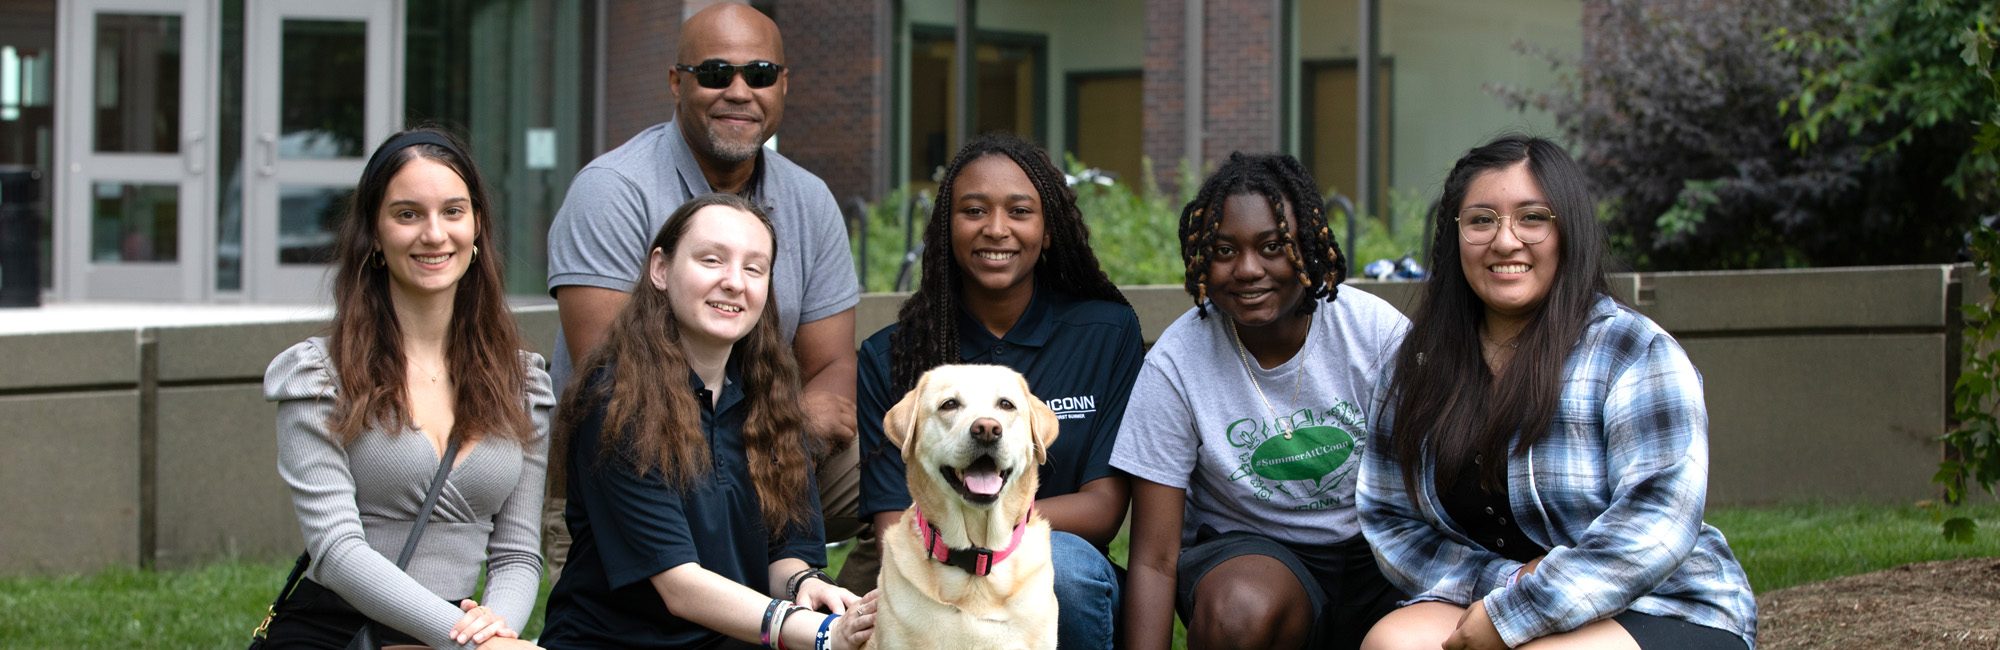 UConn First Summer students posing for photo with canine and UCFS director